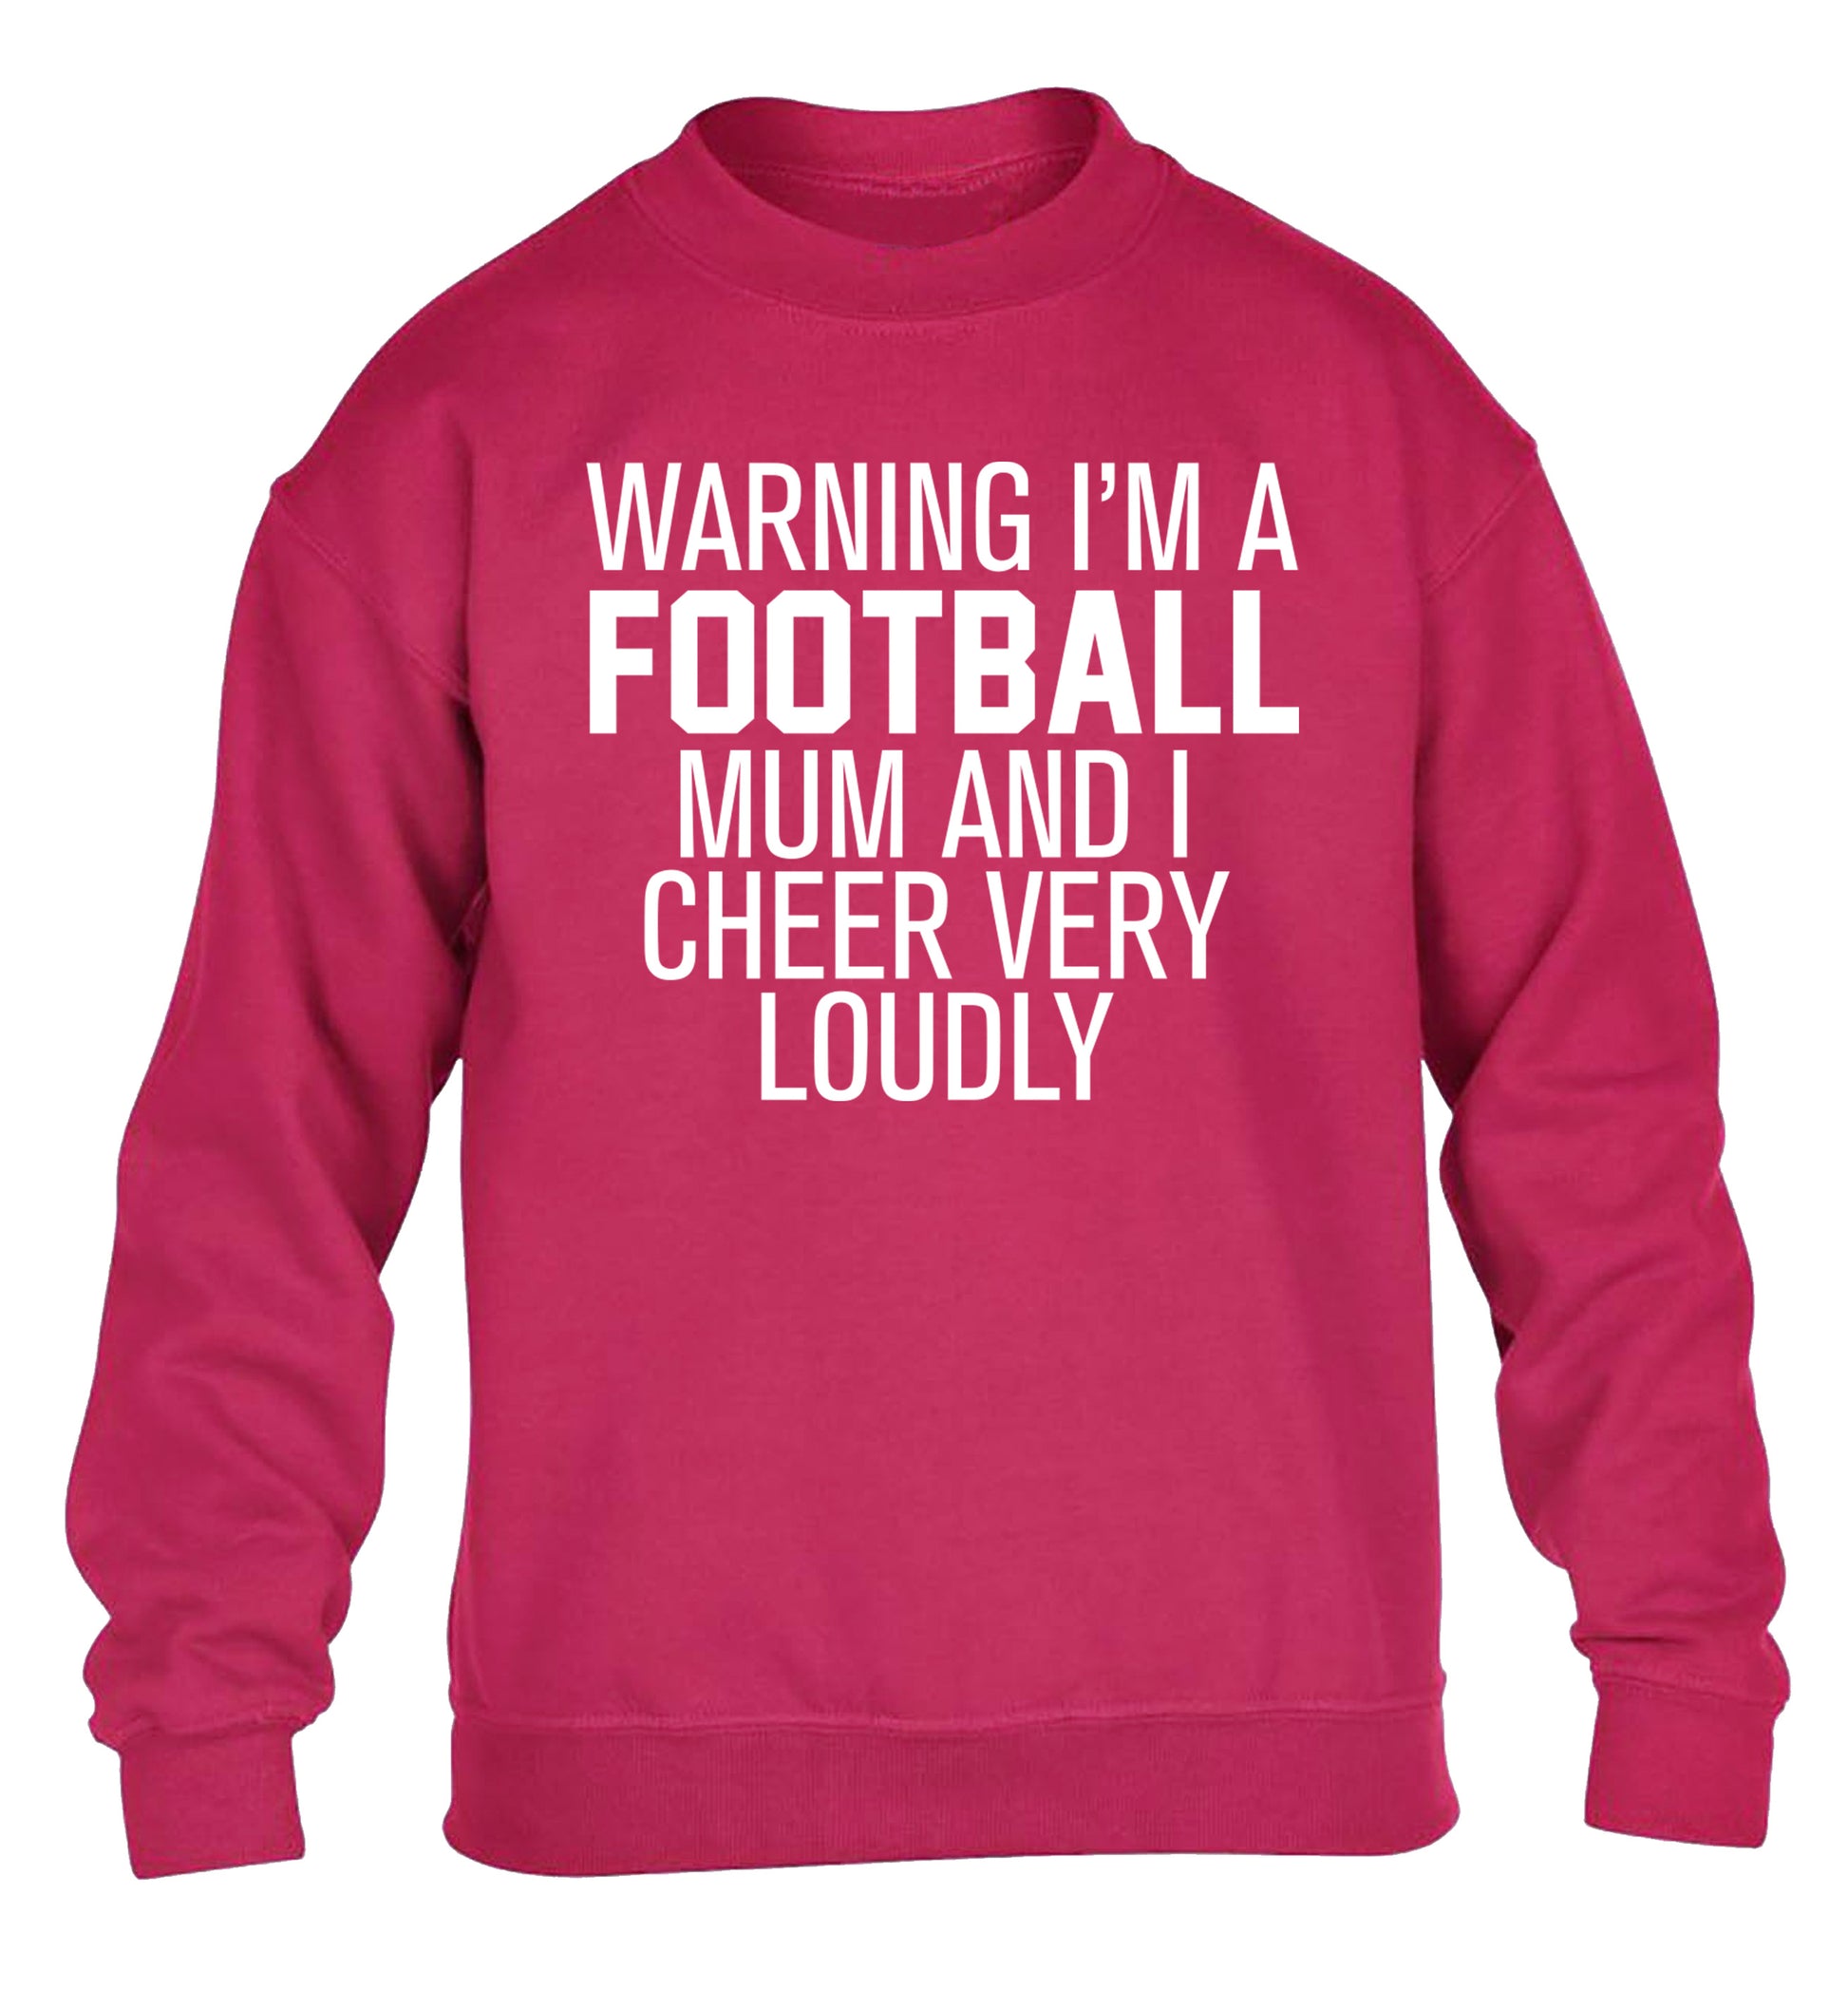 Warning I'm a football mum and I cheer very loudly children's pink sweater 12-14 Years